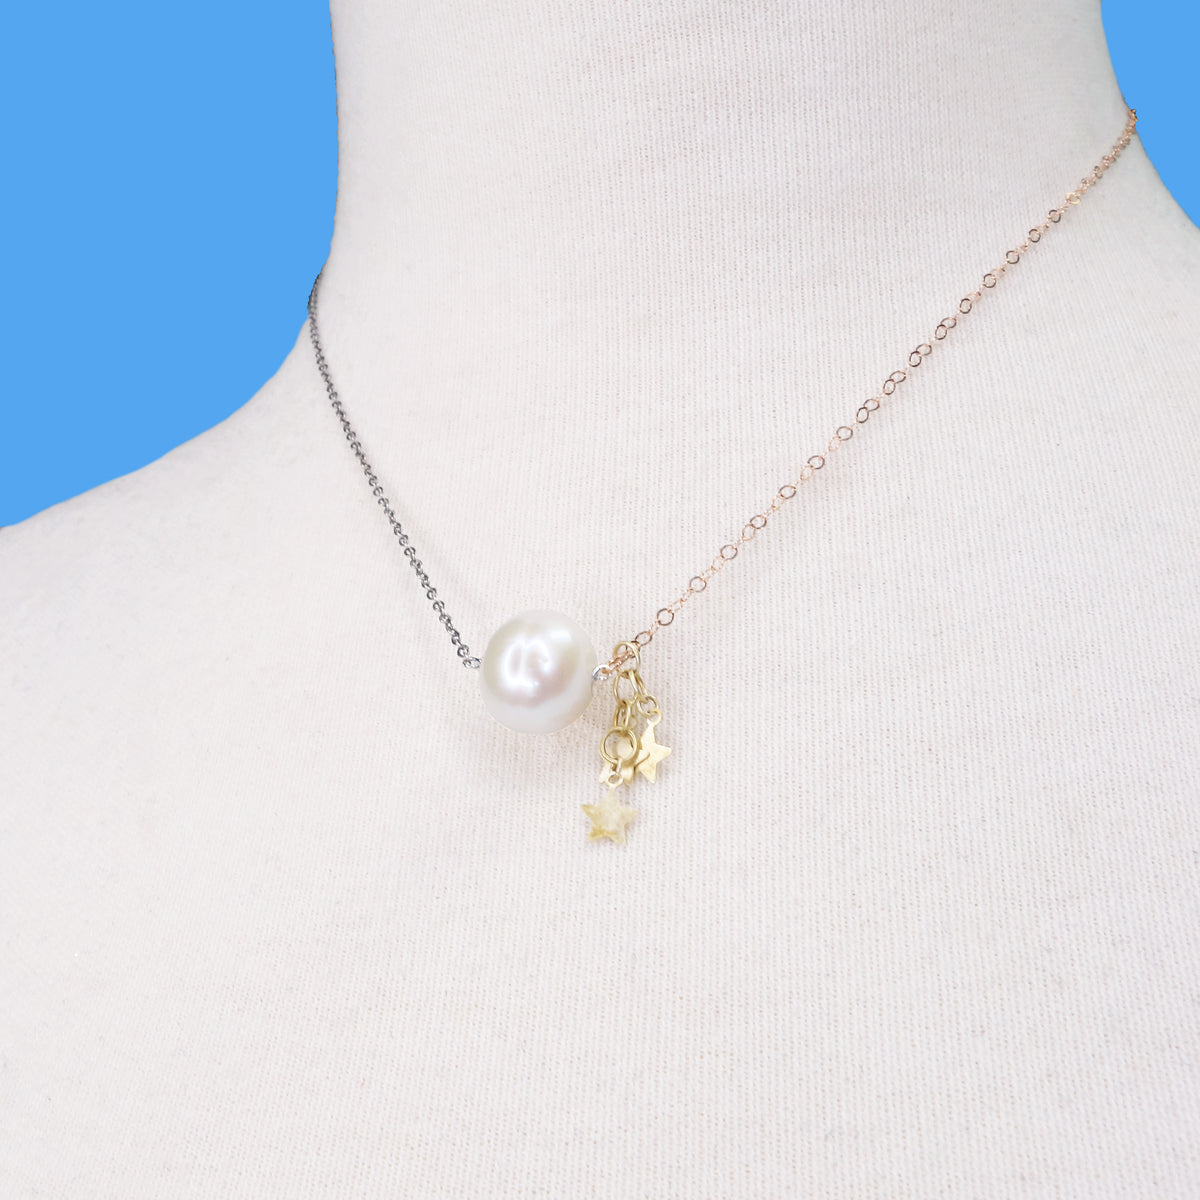 Wish Upon a Star: pearl, stars in gold necklace